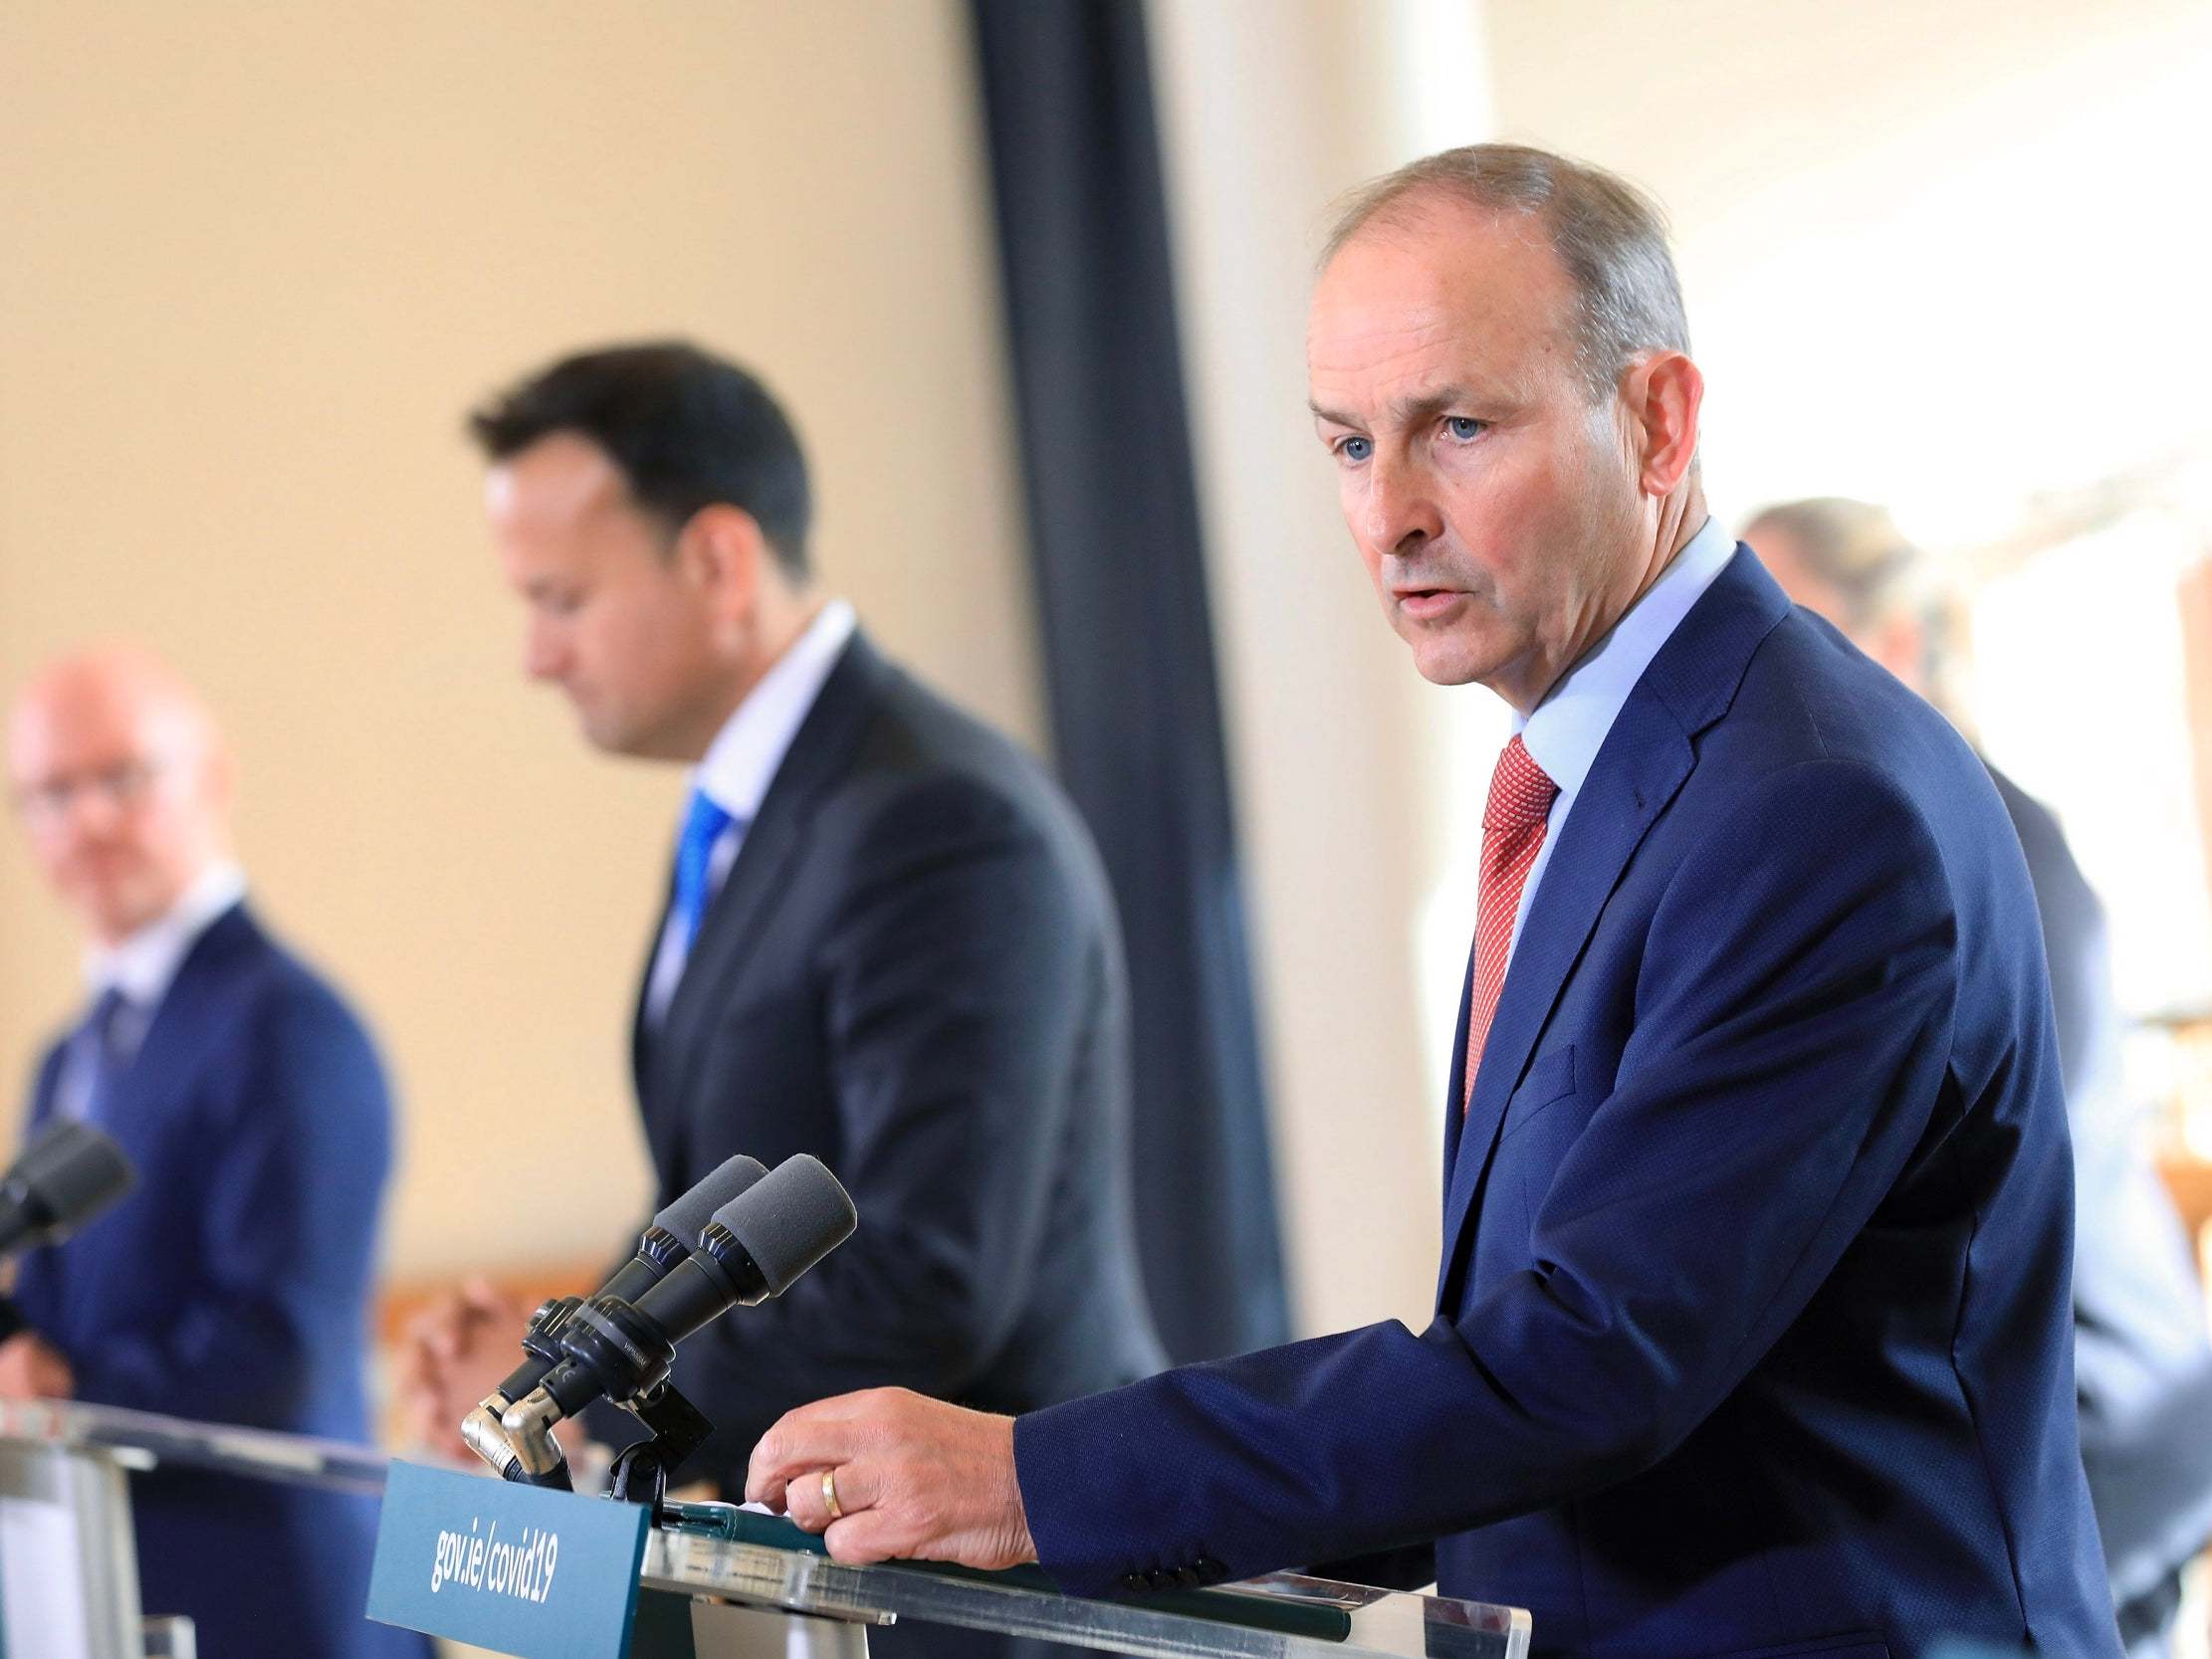 (left to right) Minister for Health Stephen Donnelly, Tanaiste Leo Varadkar and Taoiseach Micheal Martin TD during the post cabinet press briefing